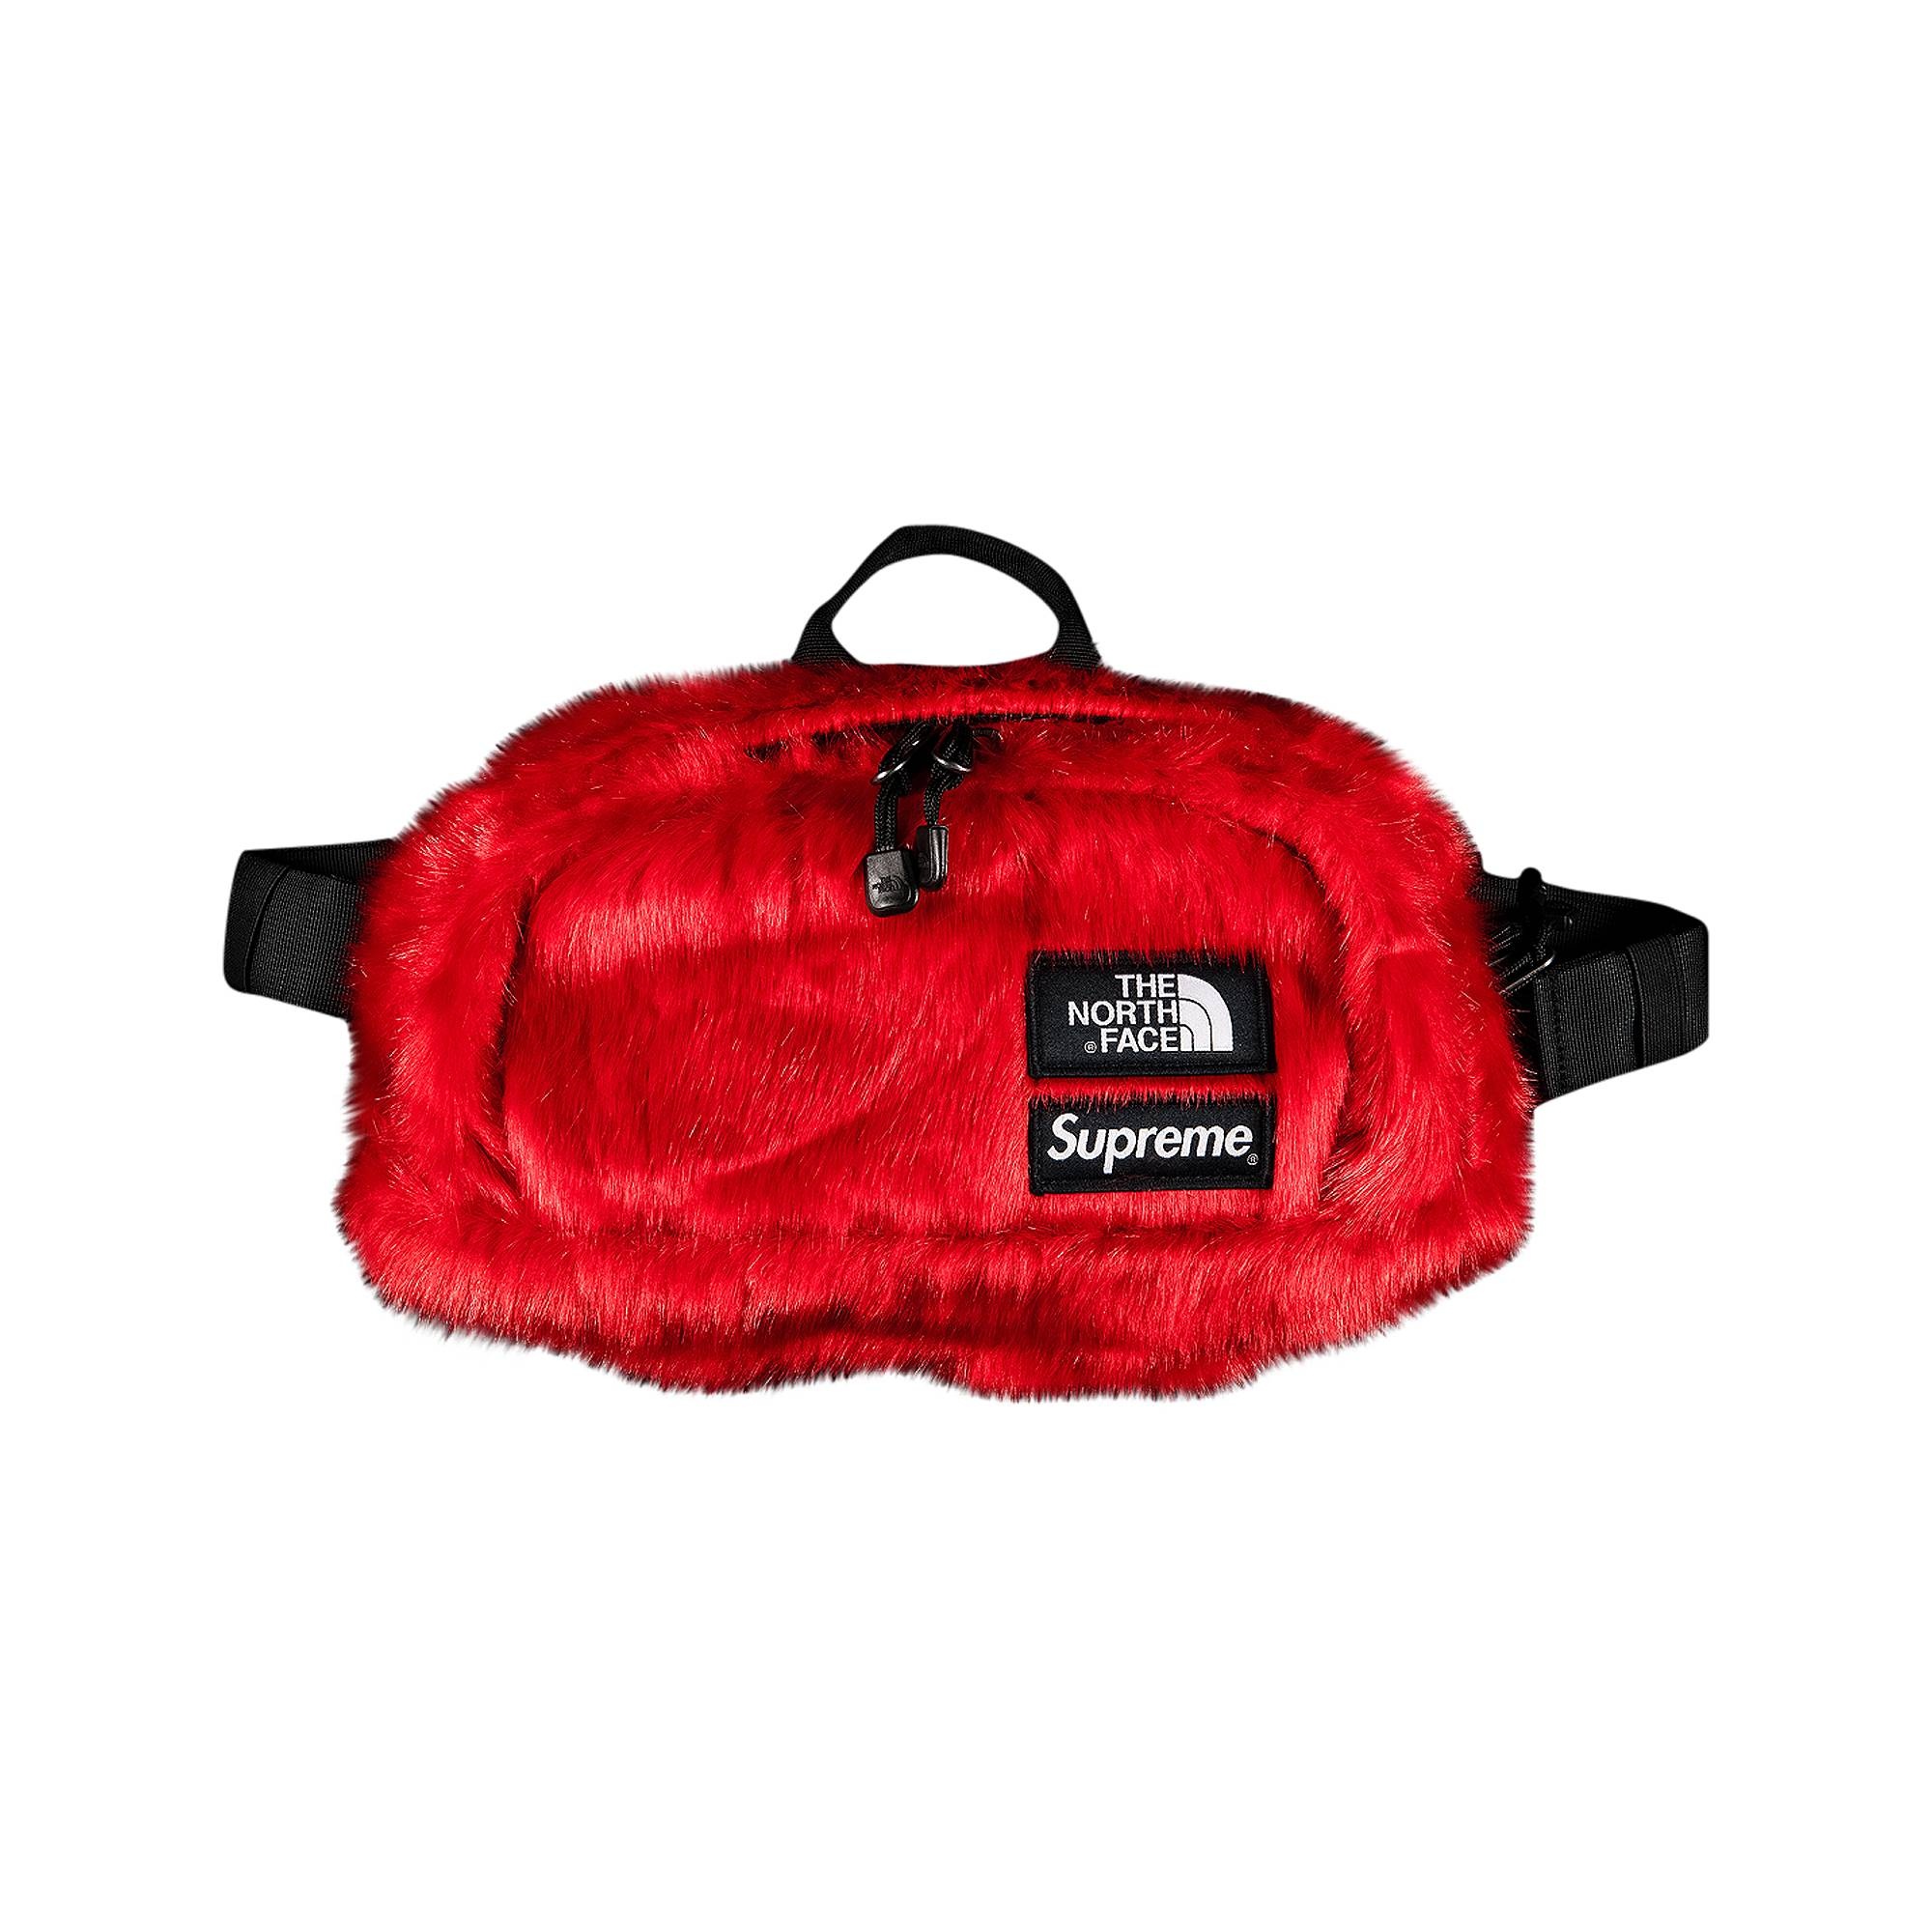 Supreme Supreme x The North Face Faux Fur Waist Bag 'Red' | REVERSIBLE